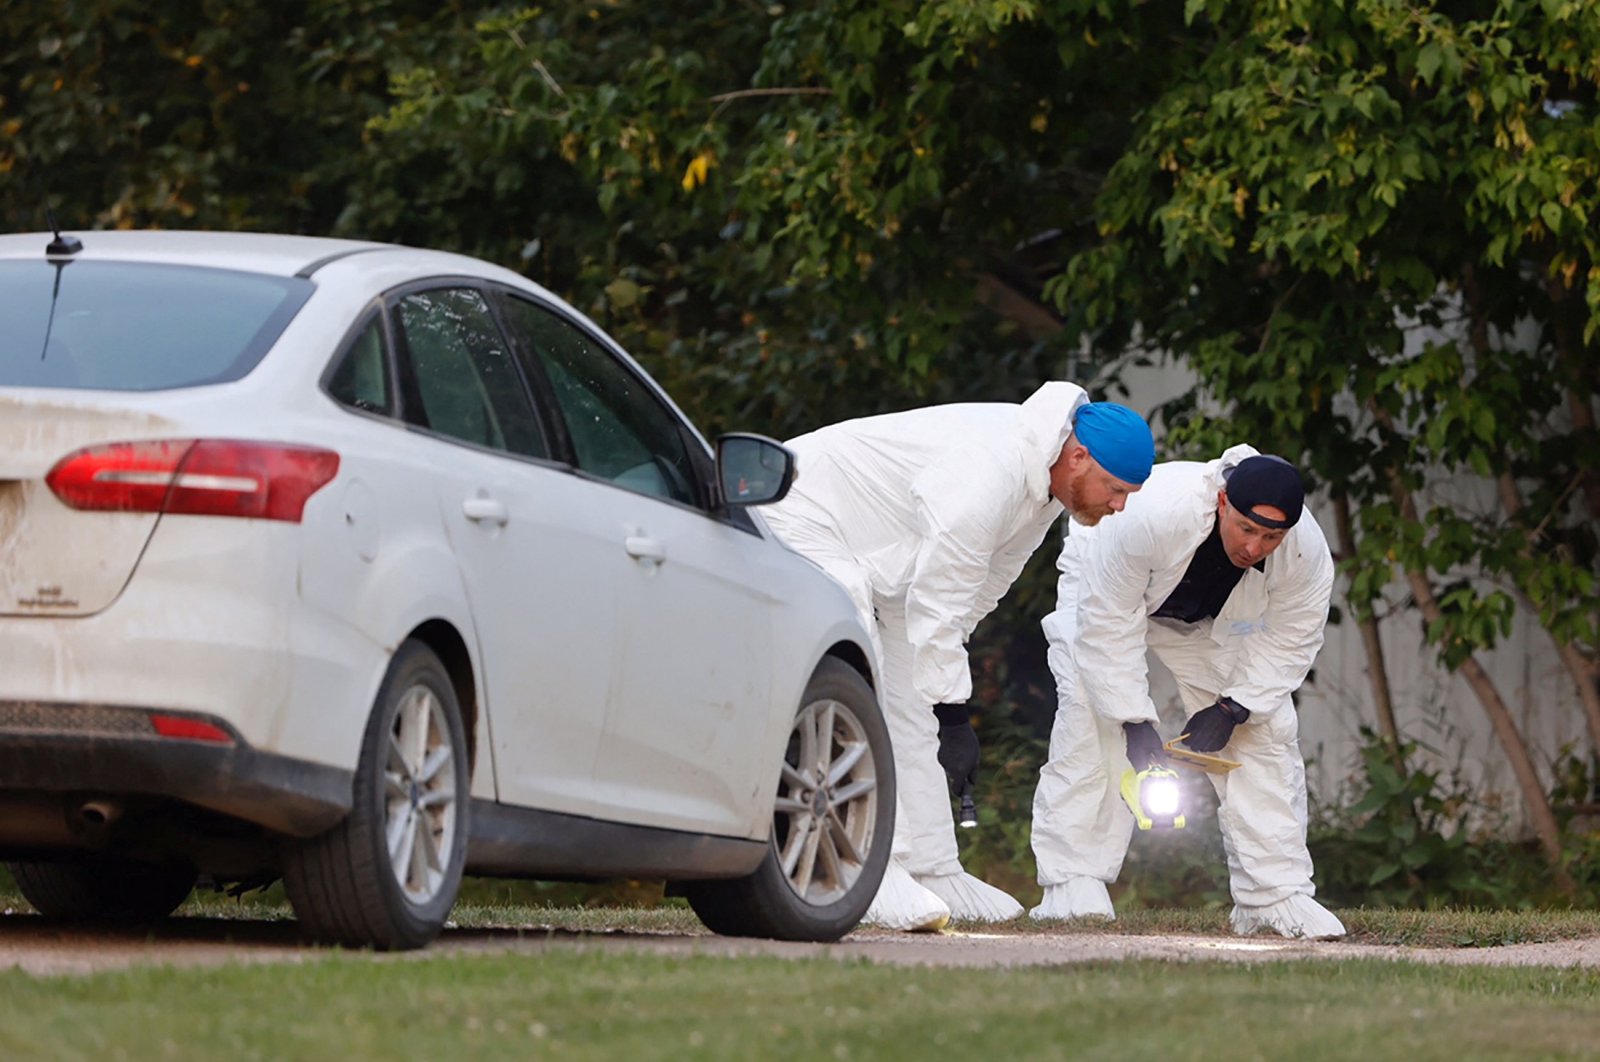 A police forensics team investigates a crime scene after multiple people were killed and injured in a stabbing spree in Weldon, Saskatchewan, Canada, Sept. 4, 2022. (Reuters Photo)